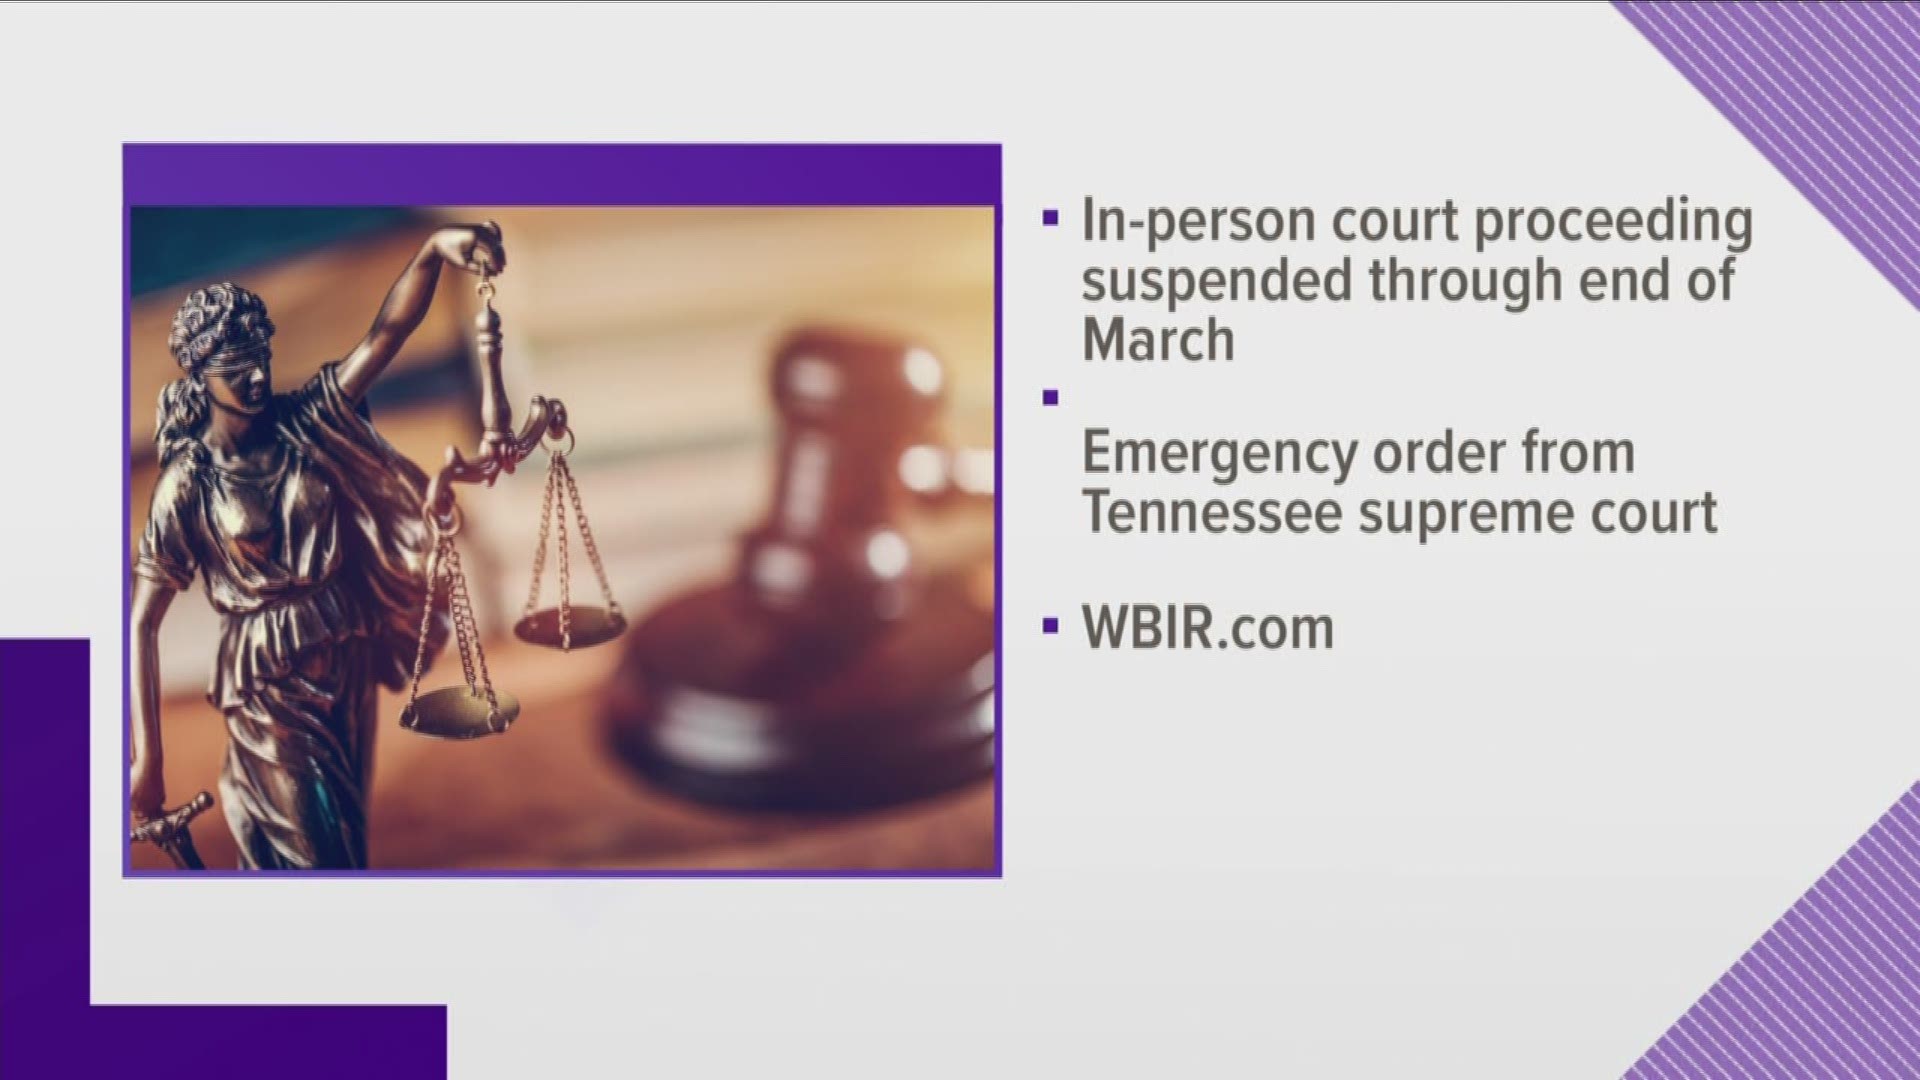 The courts are closed according to an emergency order from the State Supreme Court. State courts will continue to operate.